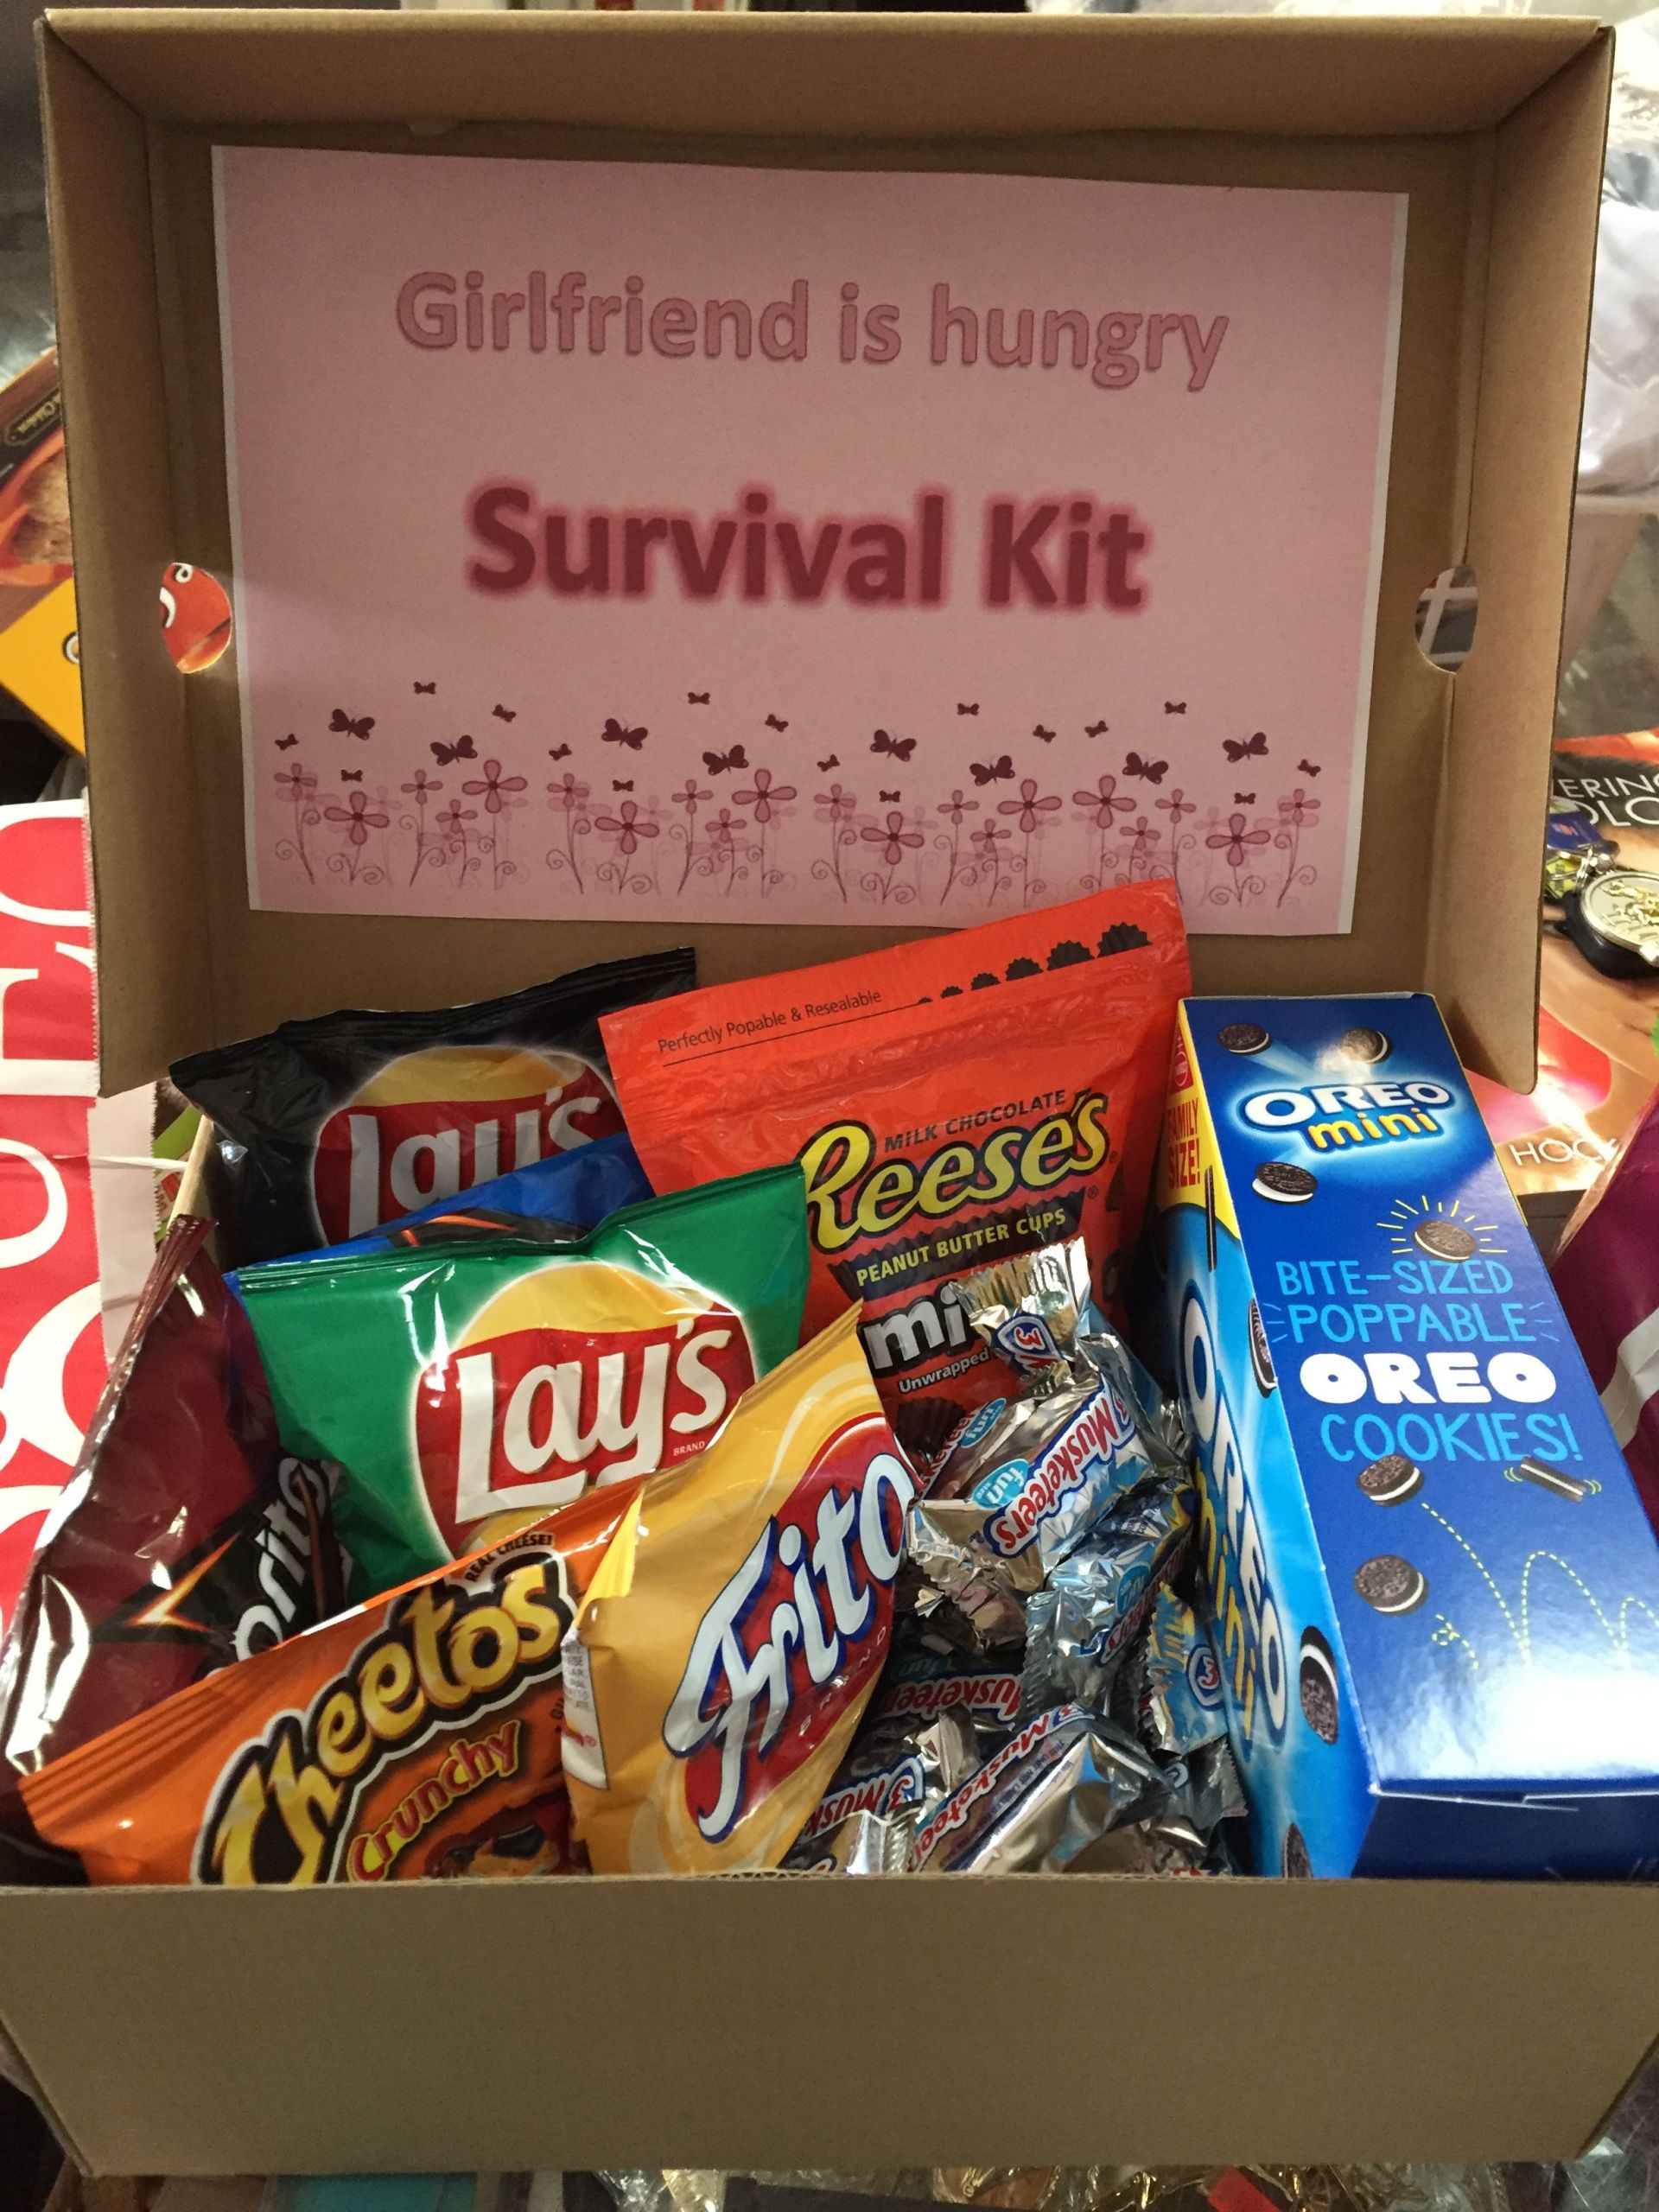 Cool Gift Ideas For Girlfriends
 You can keep this girlfriend survival kit in your car for